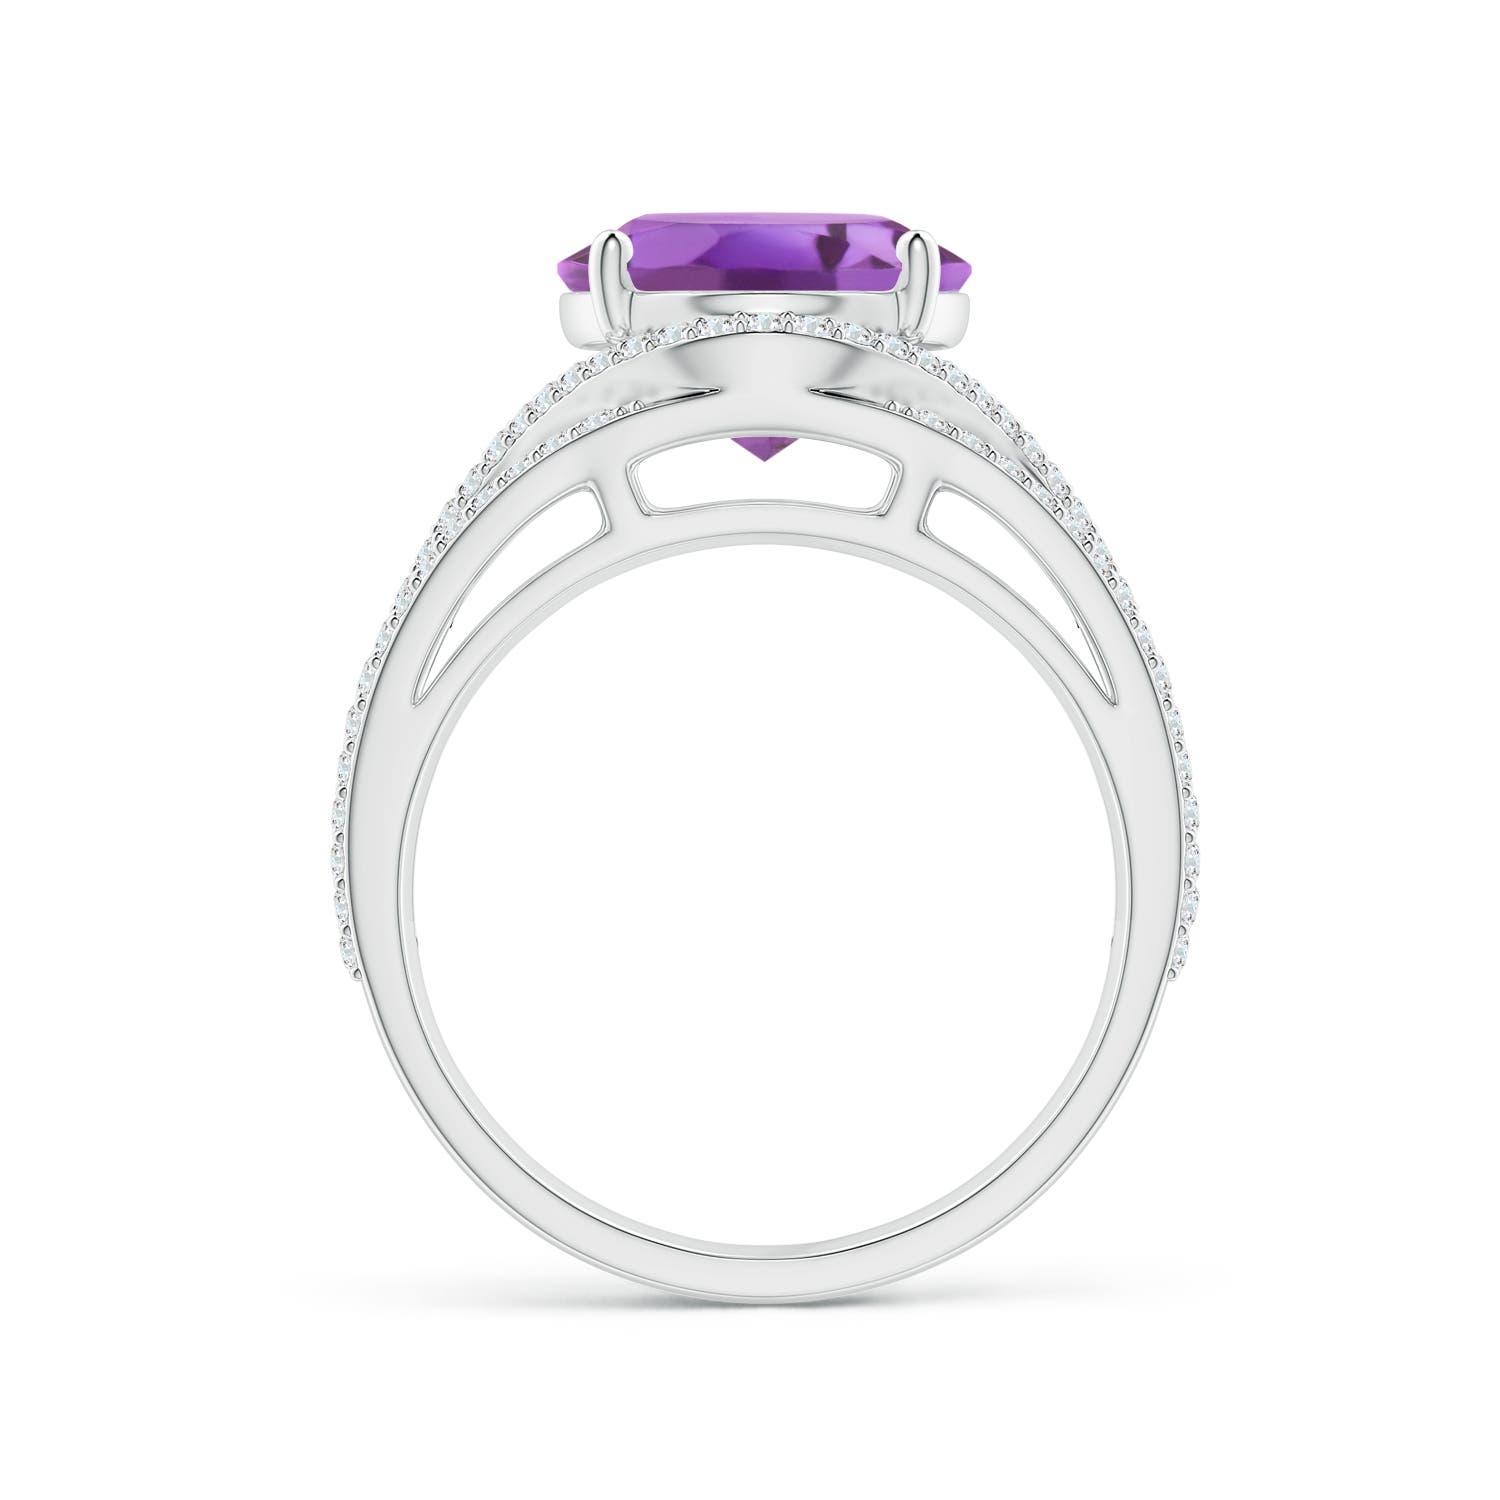 A - Amethyst / 4.94 CT / 14 KT White Gold